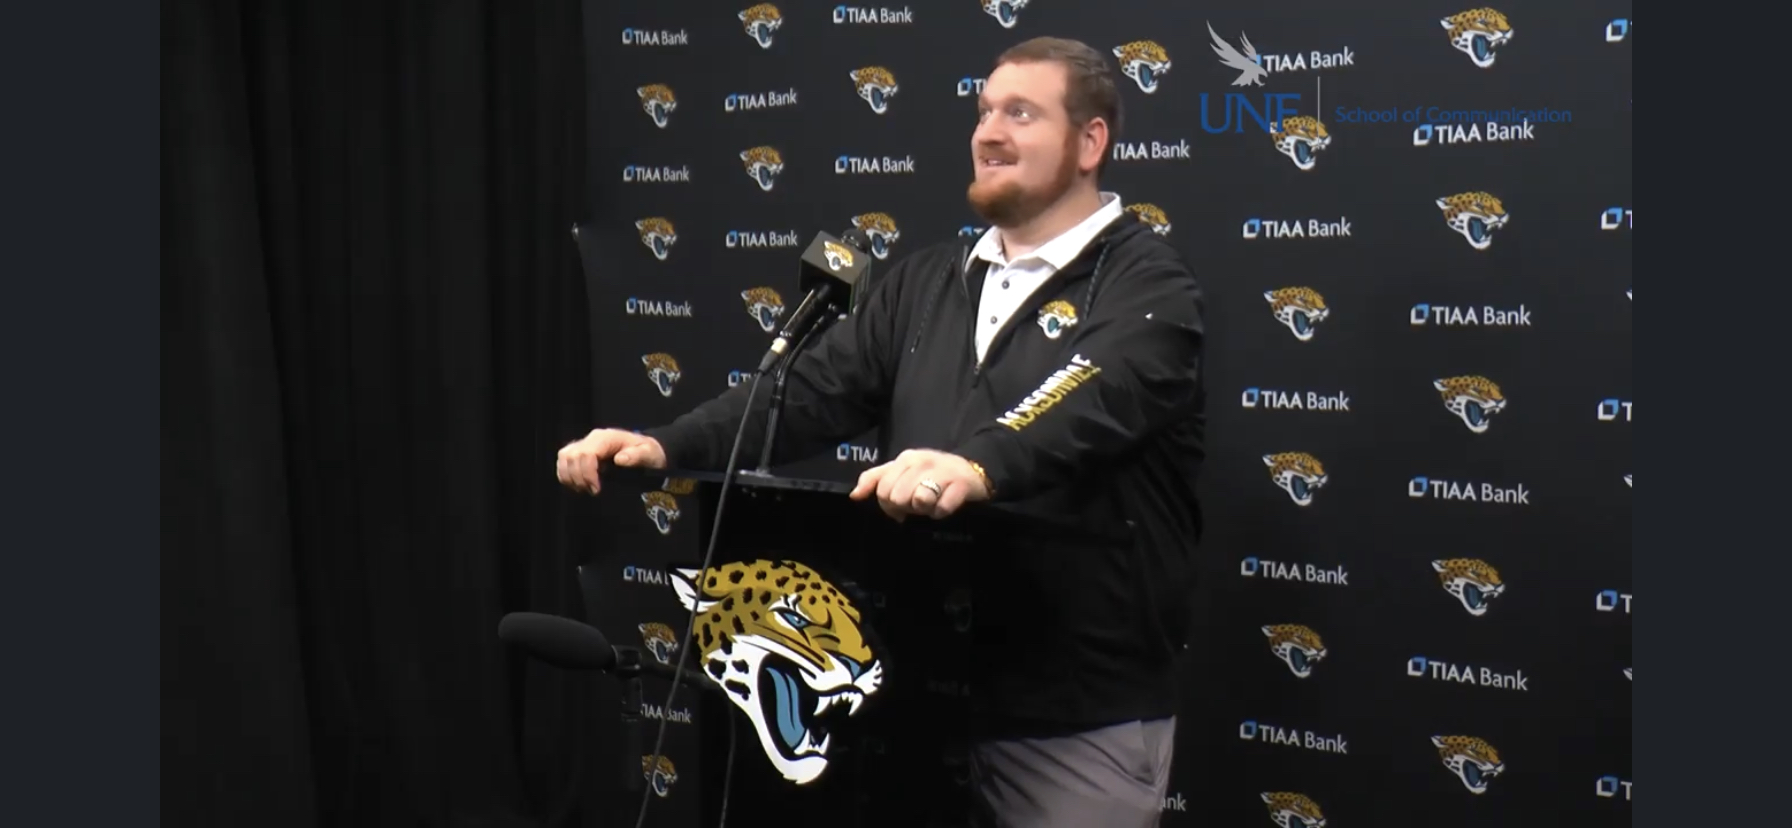 Max Hochman at the microphone at Jaguars event.